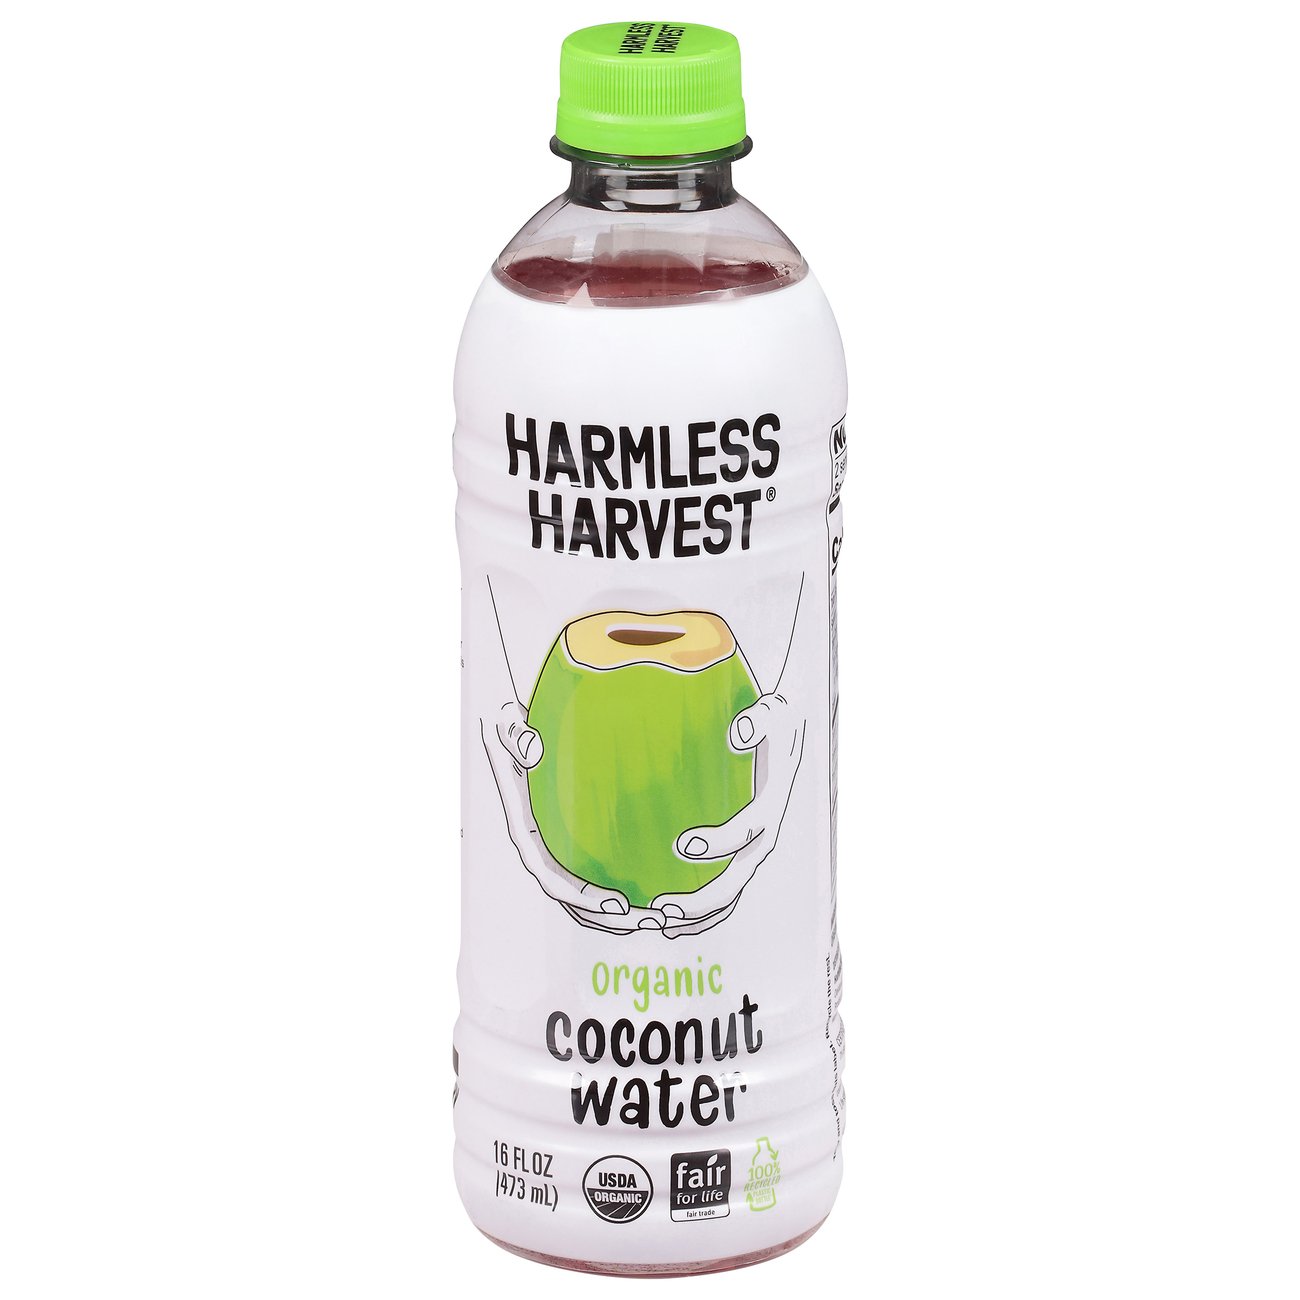 HARMLESS HARVEST Organic Coconut Water Shop Coconut Water At H E B